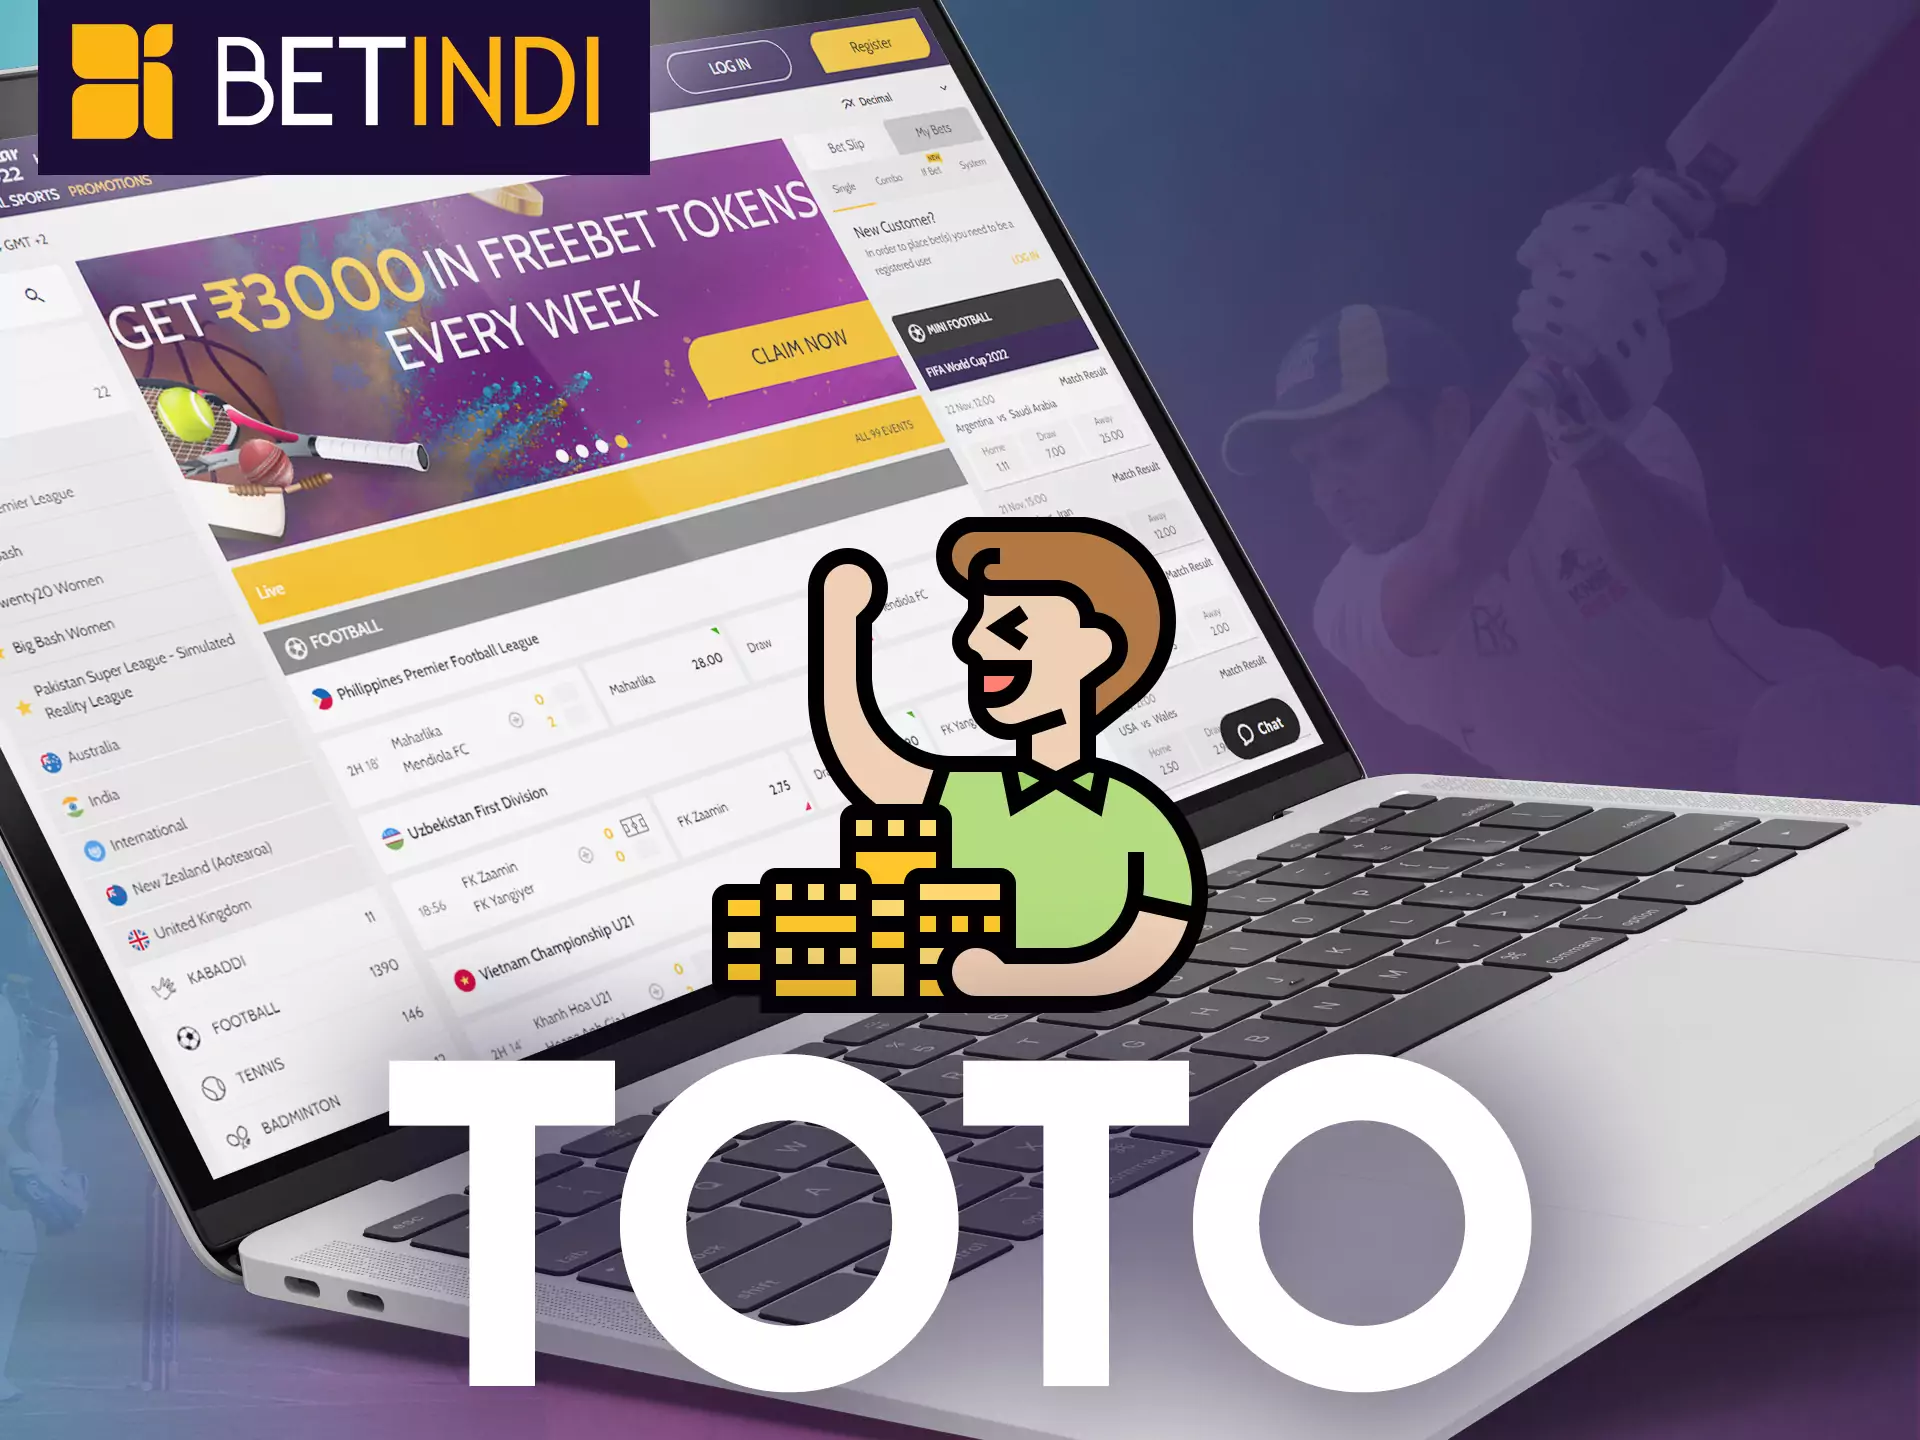 With Betindi, place bets on Toto.